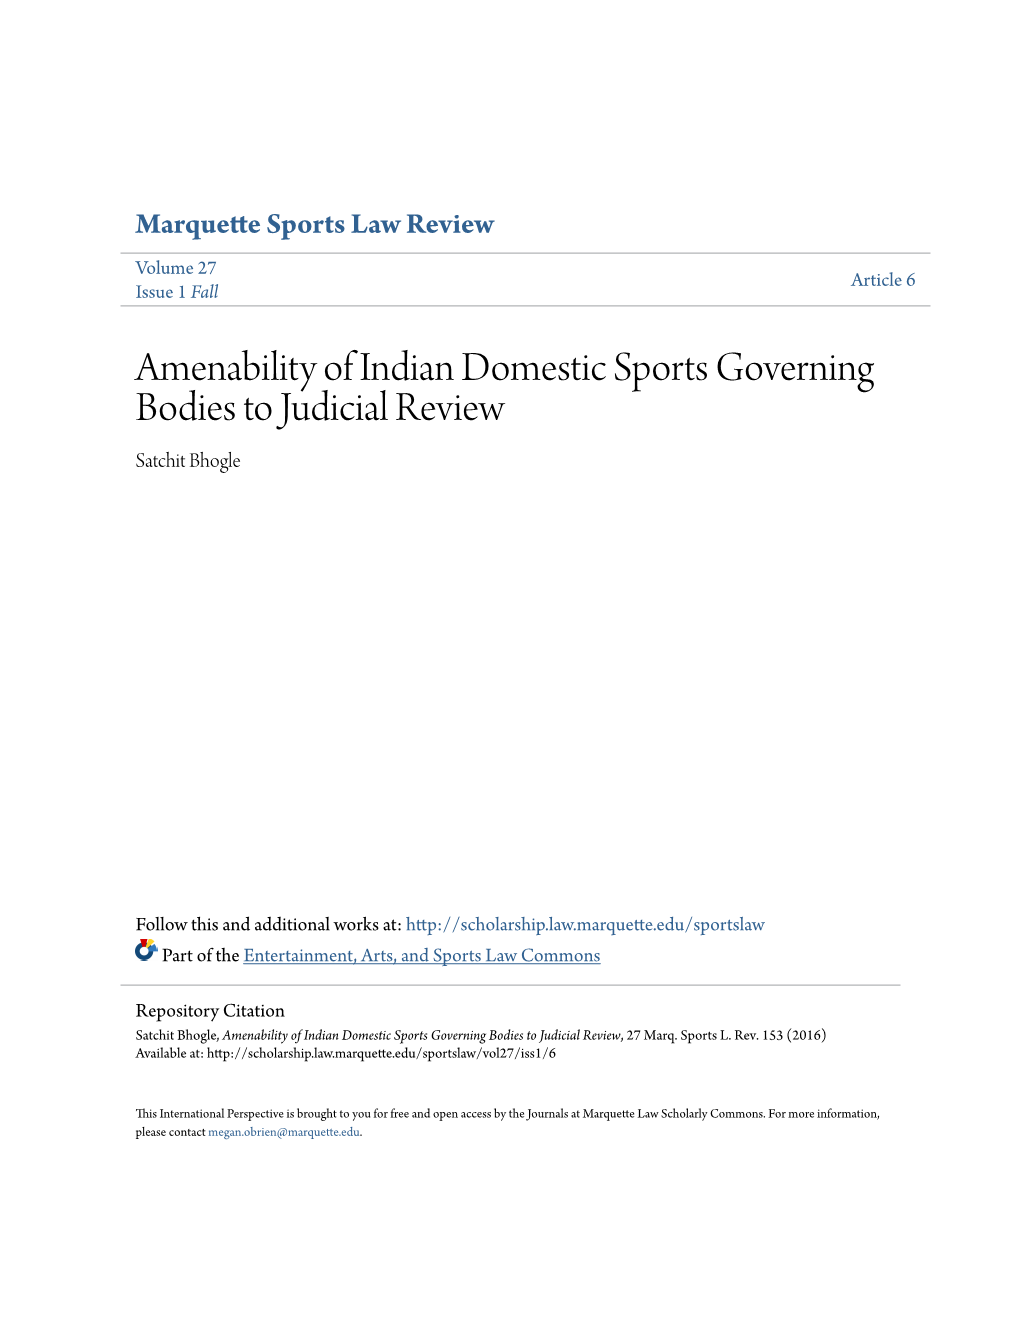 Amenability of Indian Domestic Sports Governing Bodies to Judicial Review Satchit Bhogle